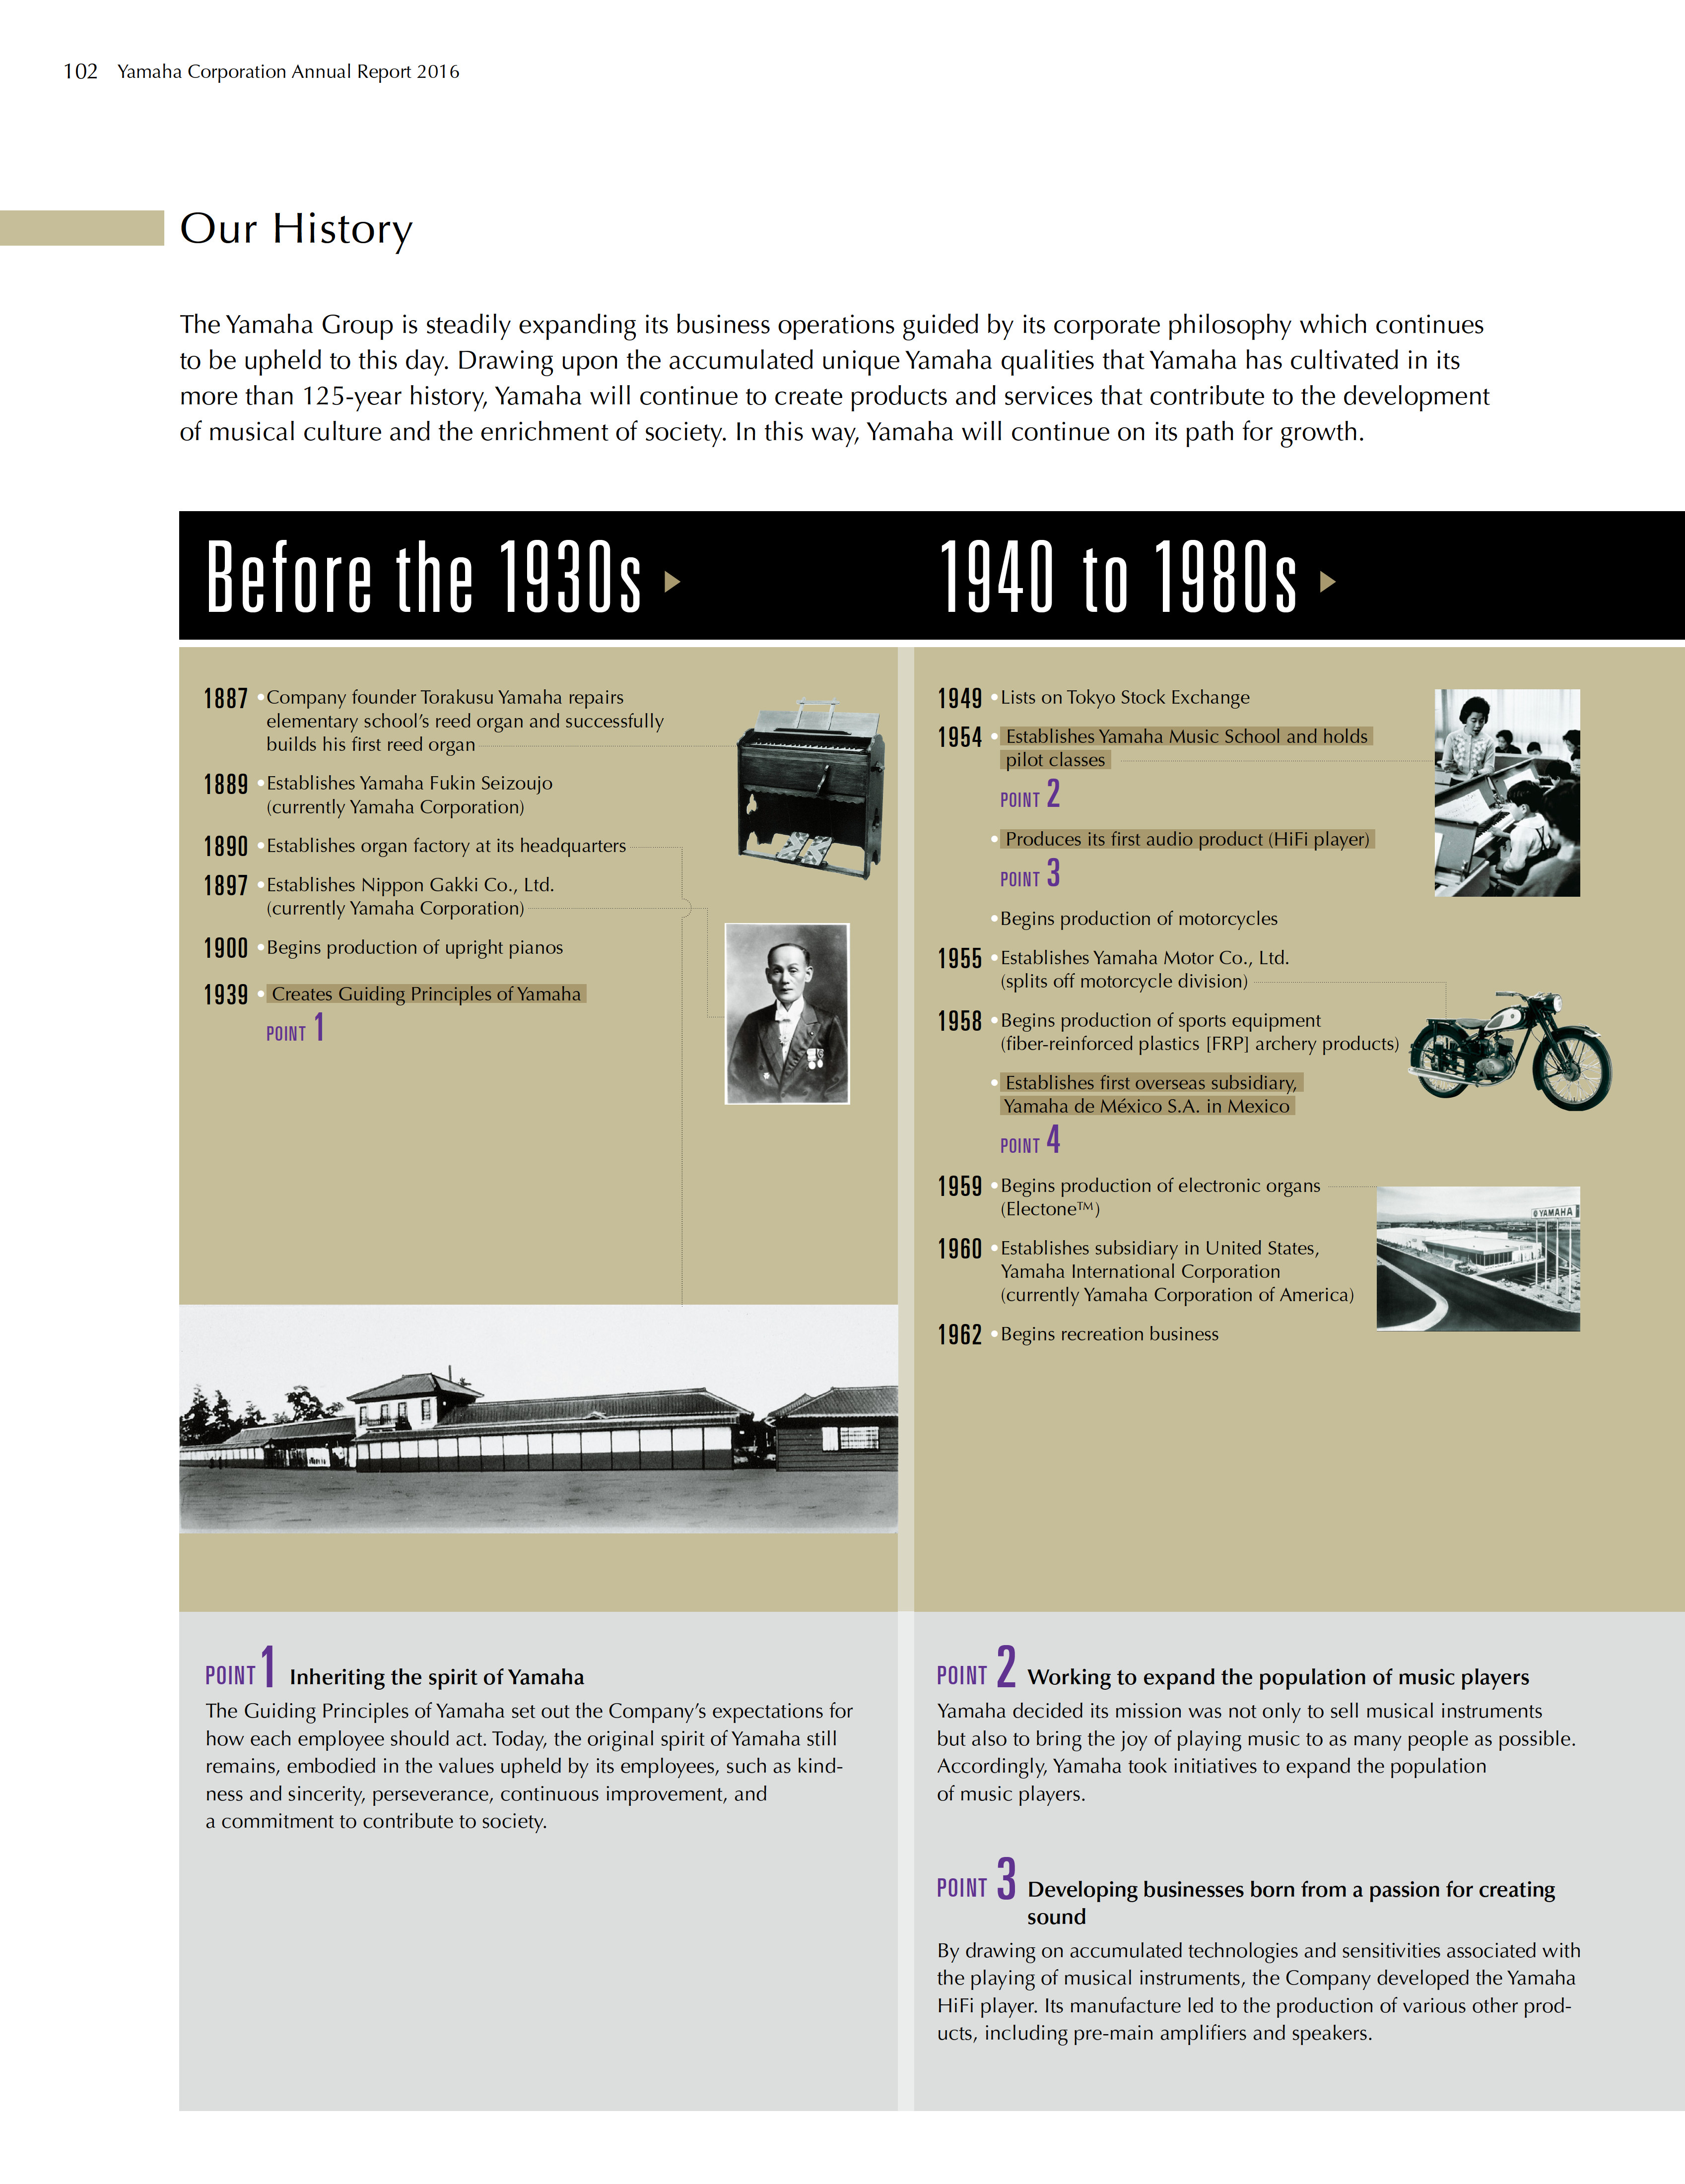 The Full History of the Yamaha Corporation Since 1887